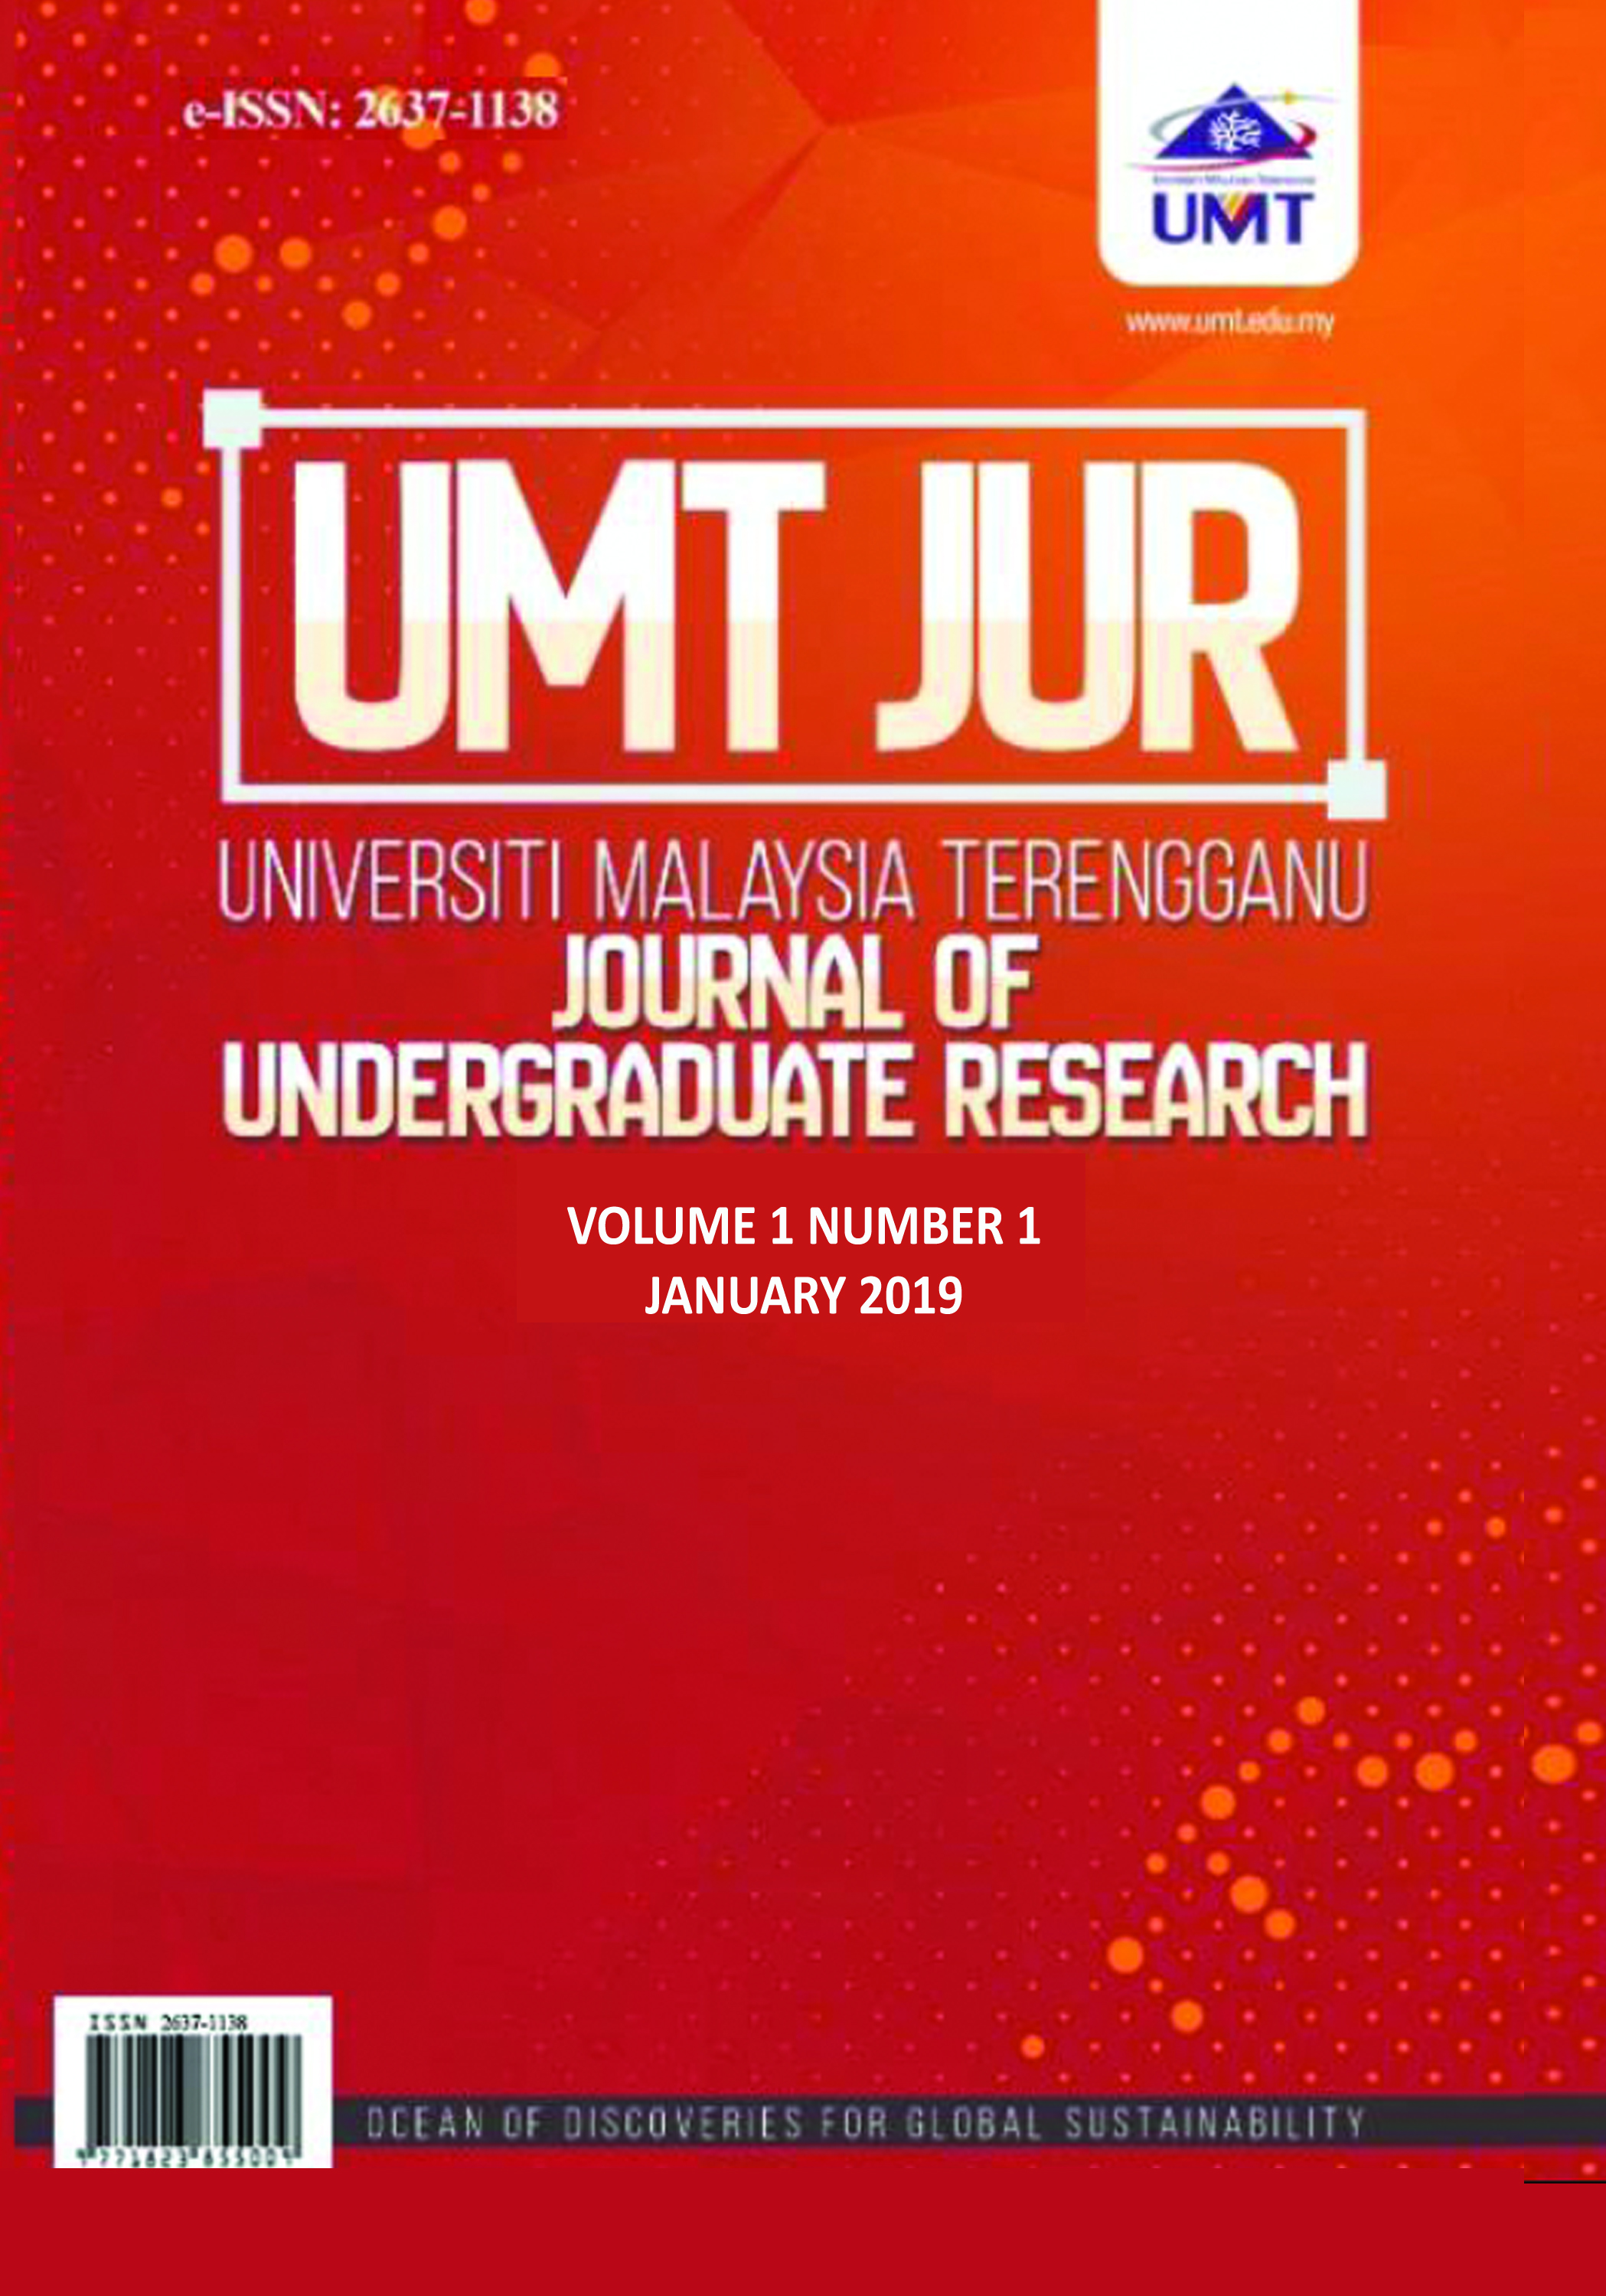 					View Vol. 1 No. 1 (2019): UMT Journal of Undergraduate Research, January 2019
				